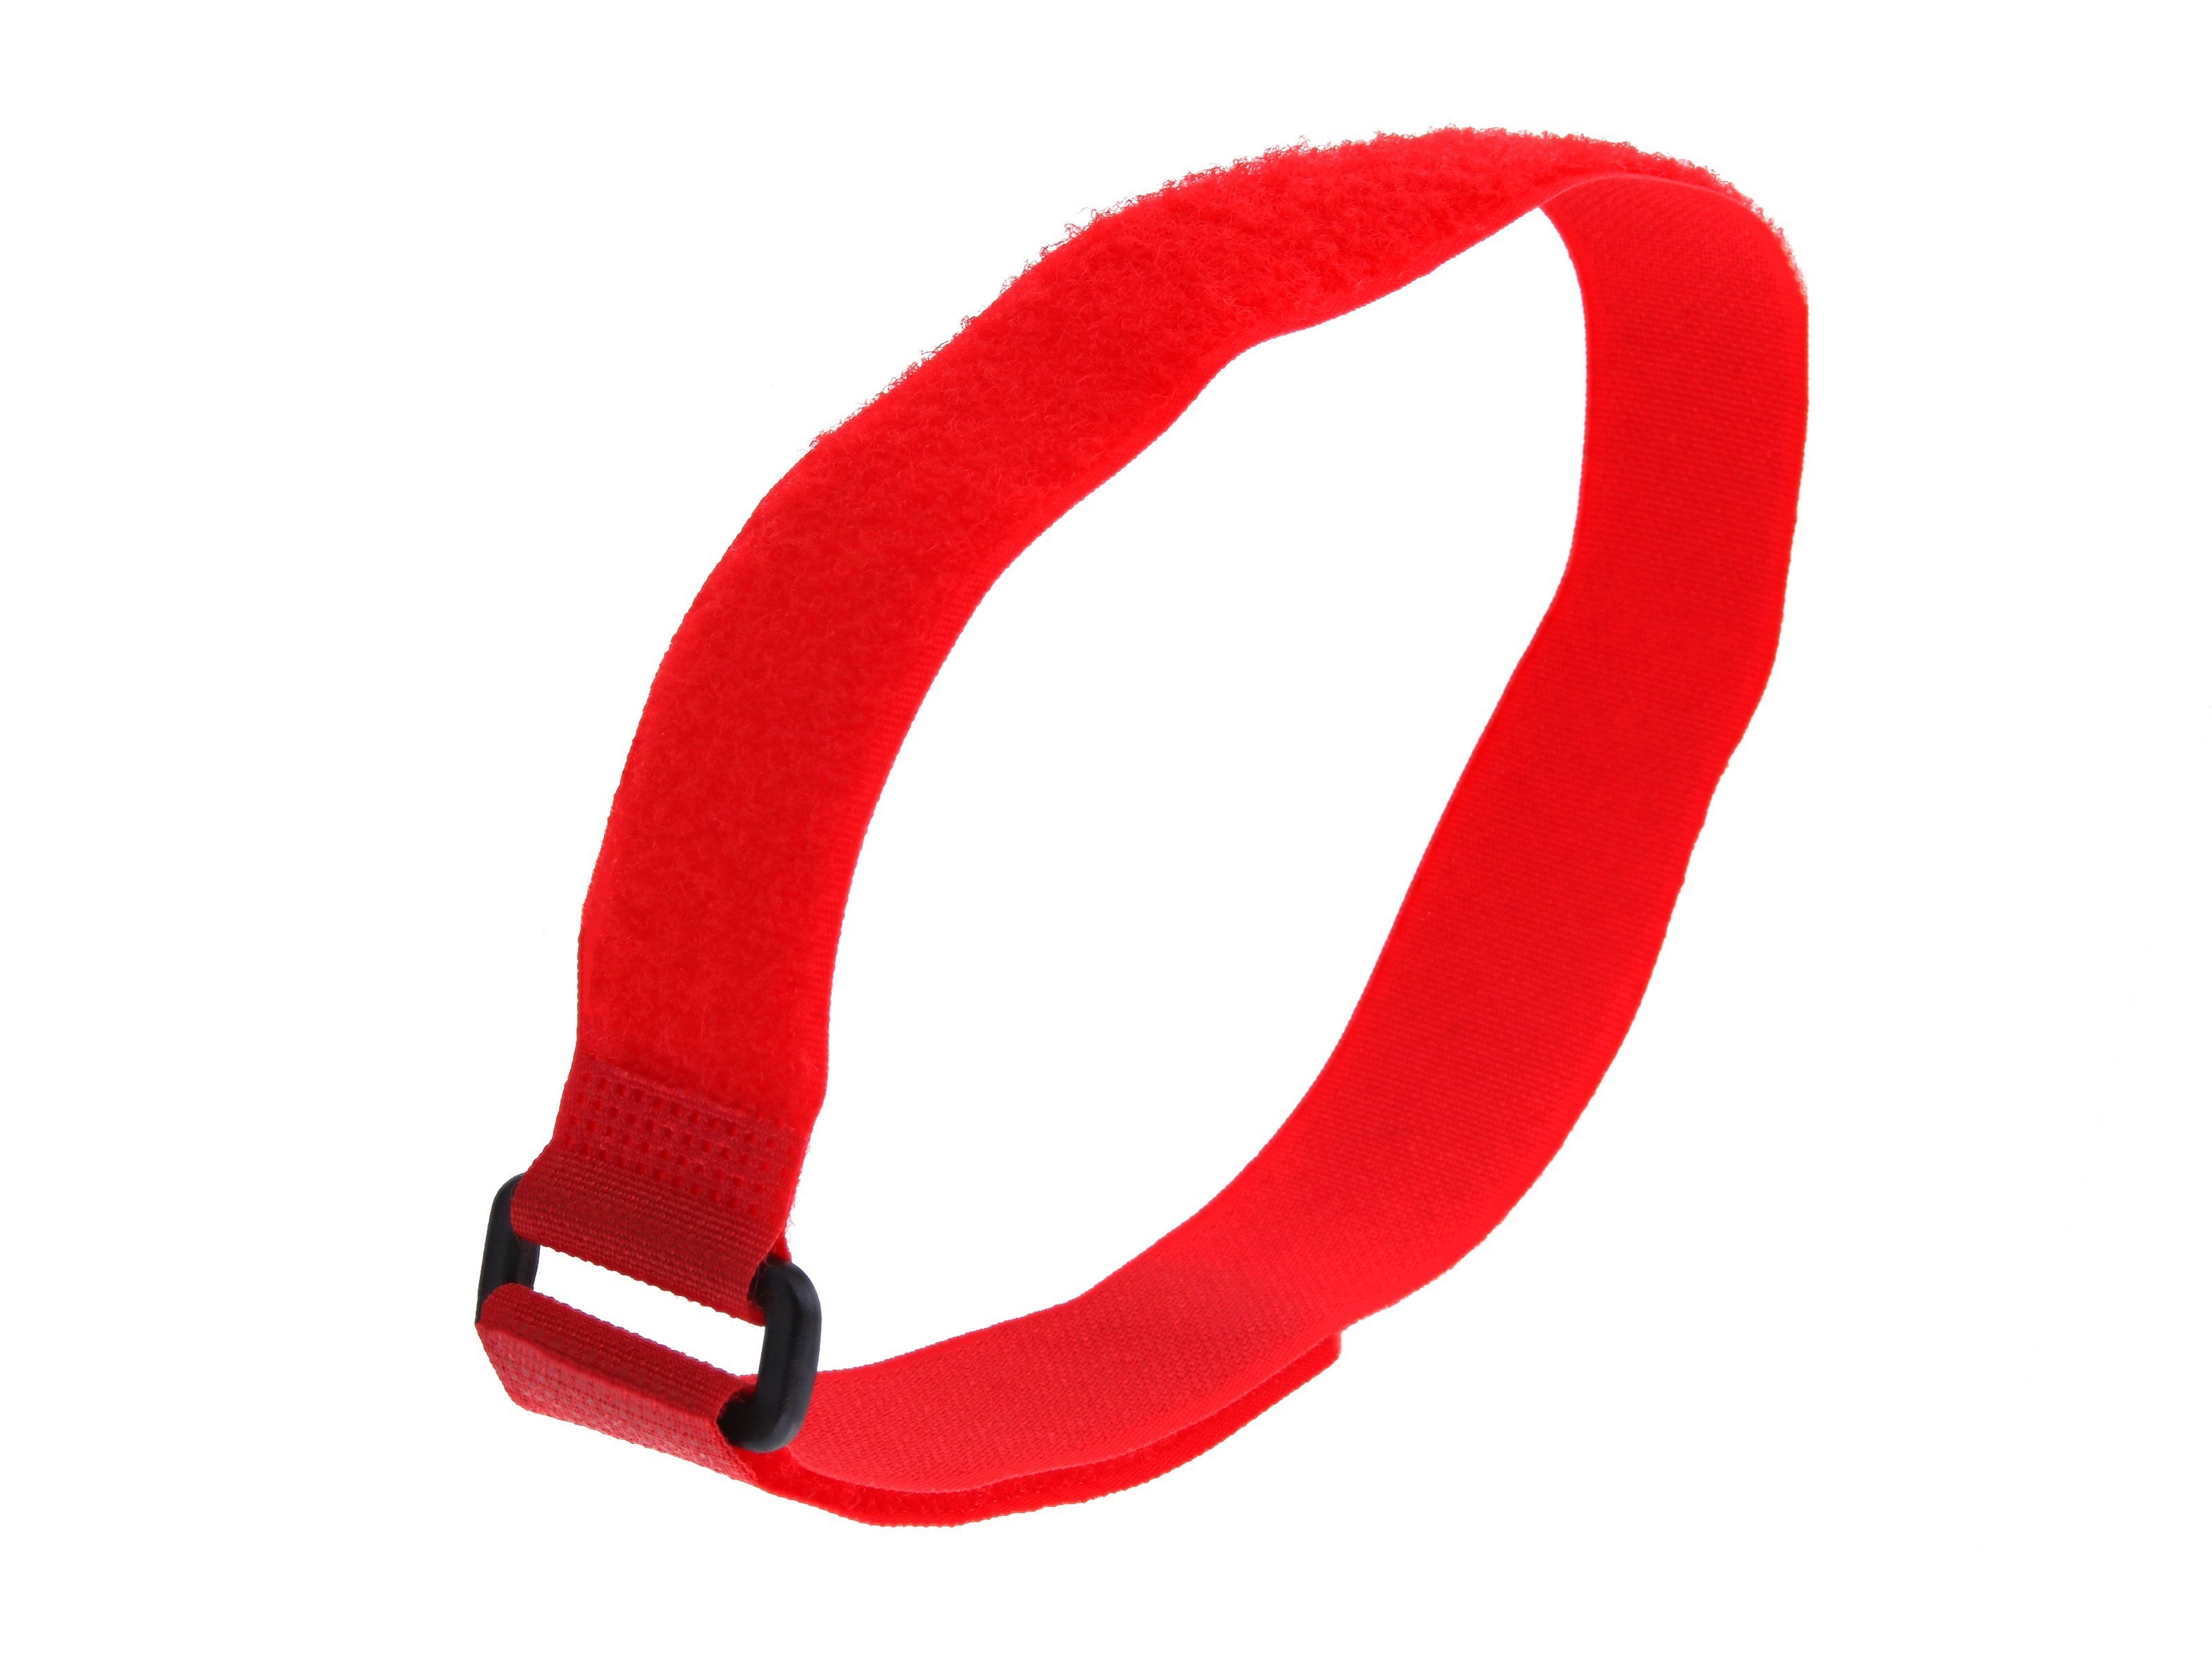 Secure Cable Ties All Purpose Elastic Cinch Strap - 18 x 1 inch - 5 Pa